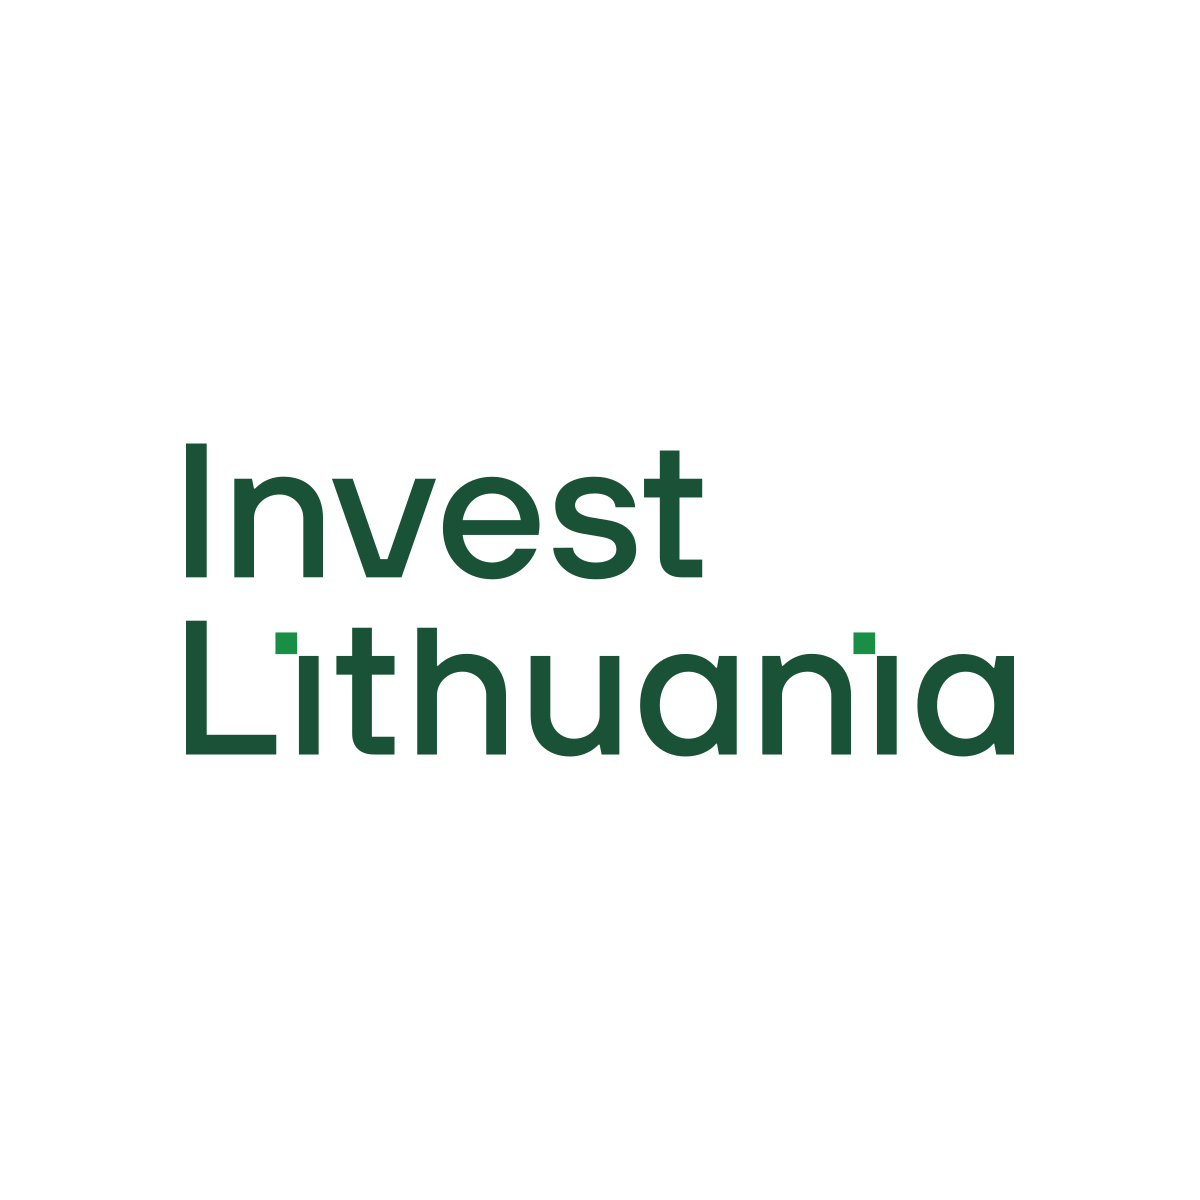 Invest Lithuania - Wikipedia